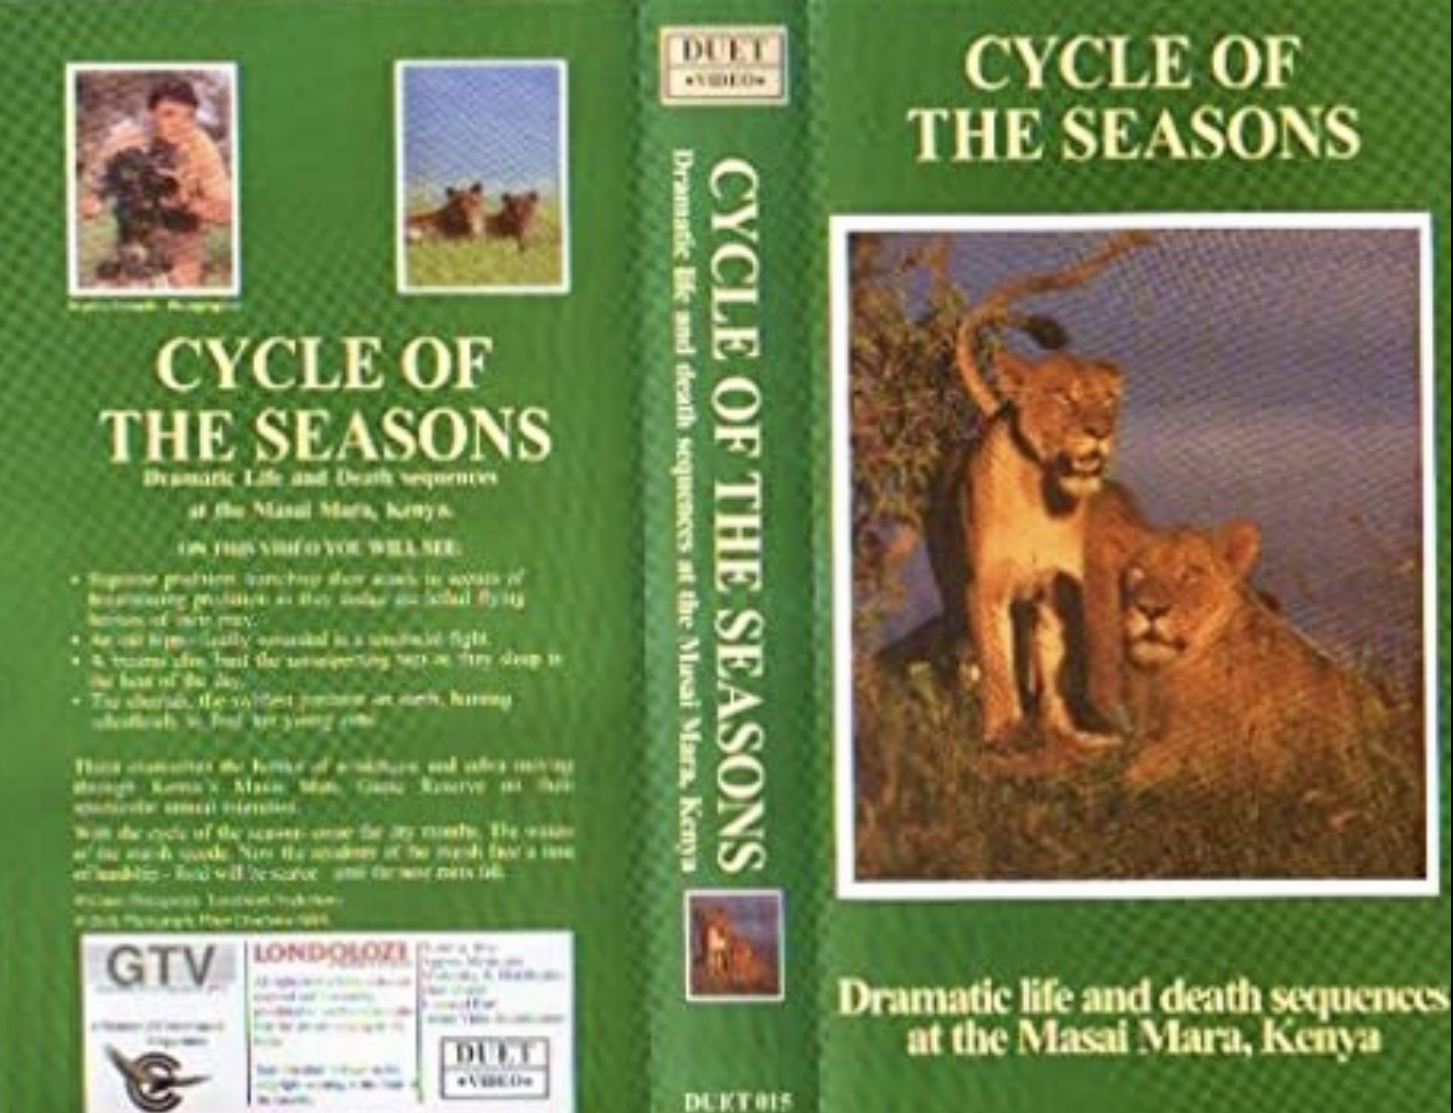 Cycle of the seasons